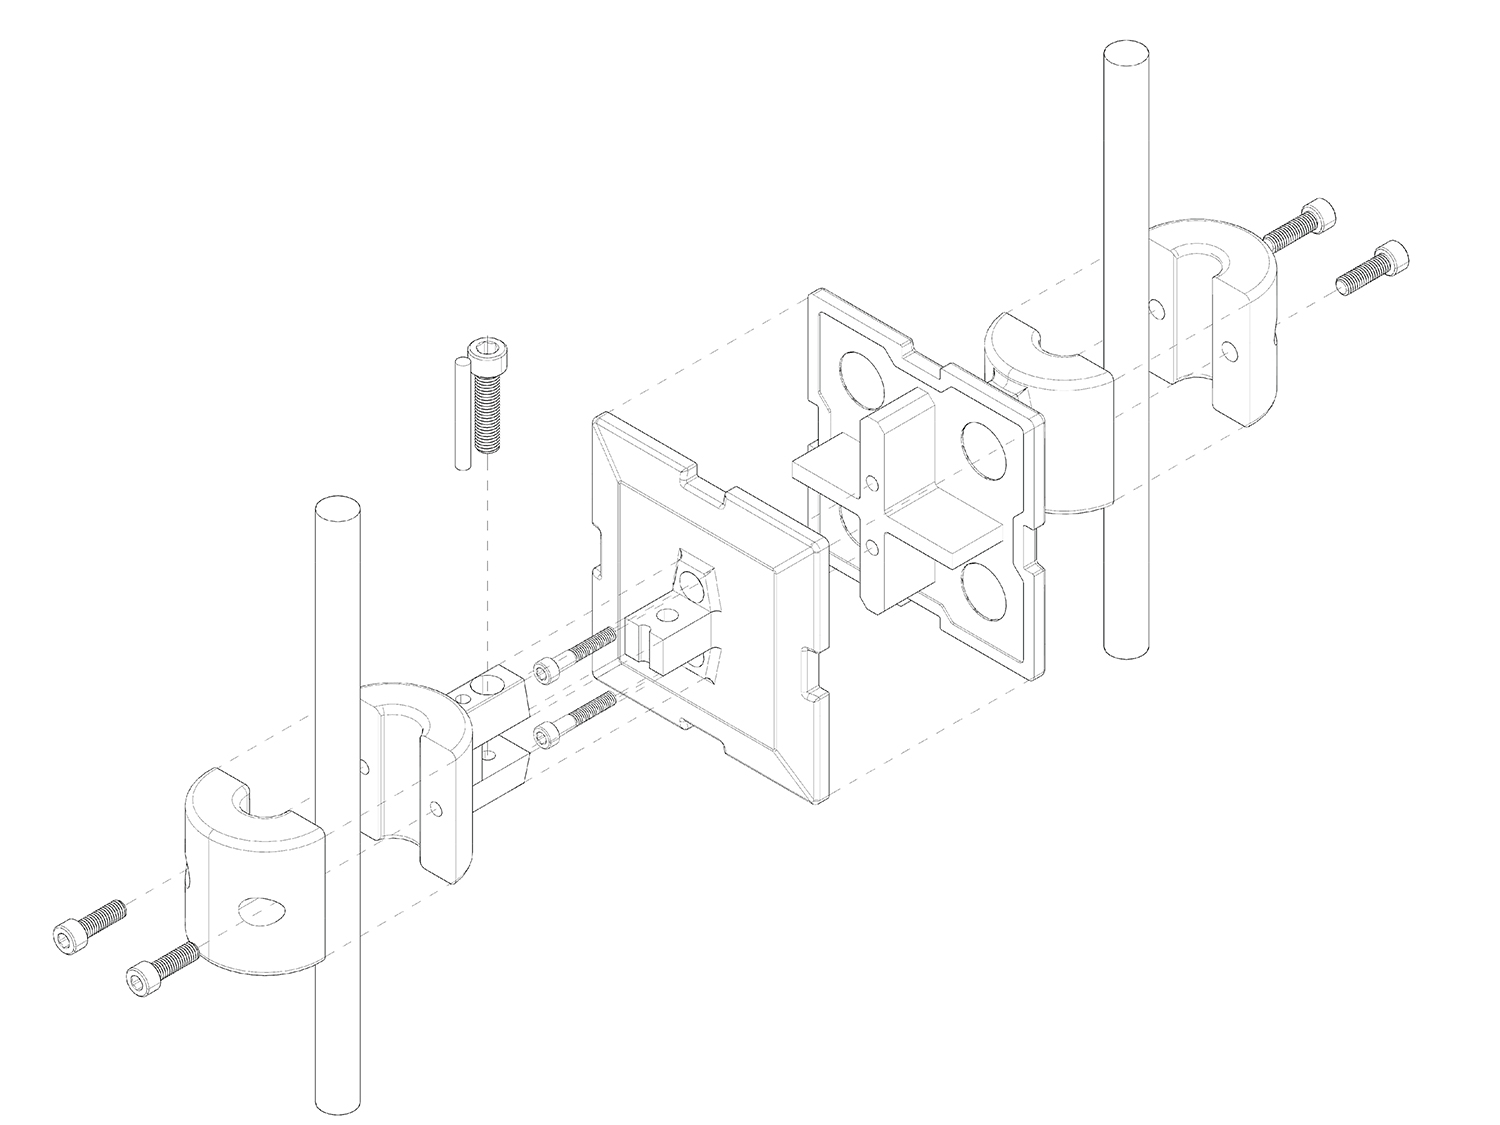 WMAA exploded axonometric drawing of cable wall attachment by Kevin Shcorn